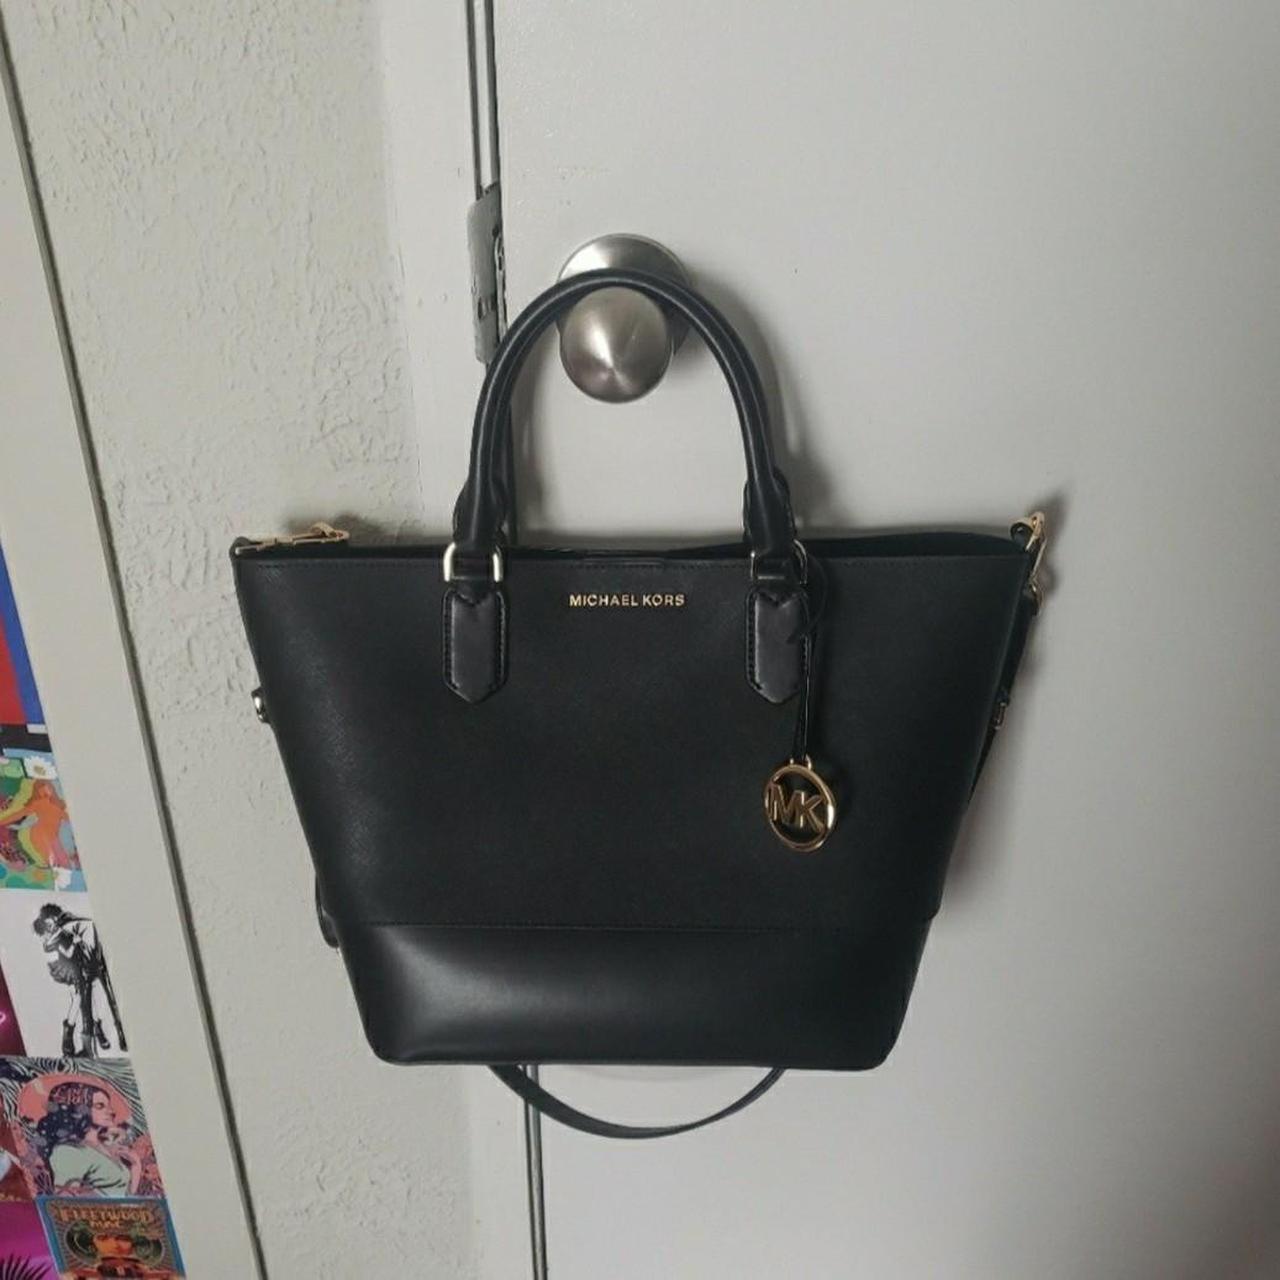 Michael Kors Black Leather with Gold Chain Bag, Gently Used